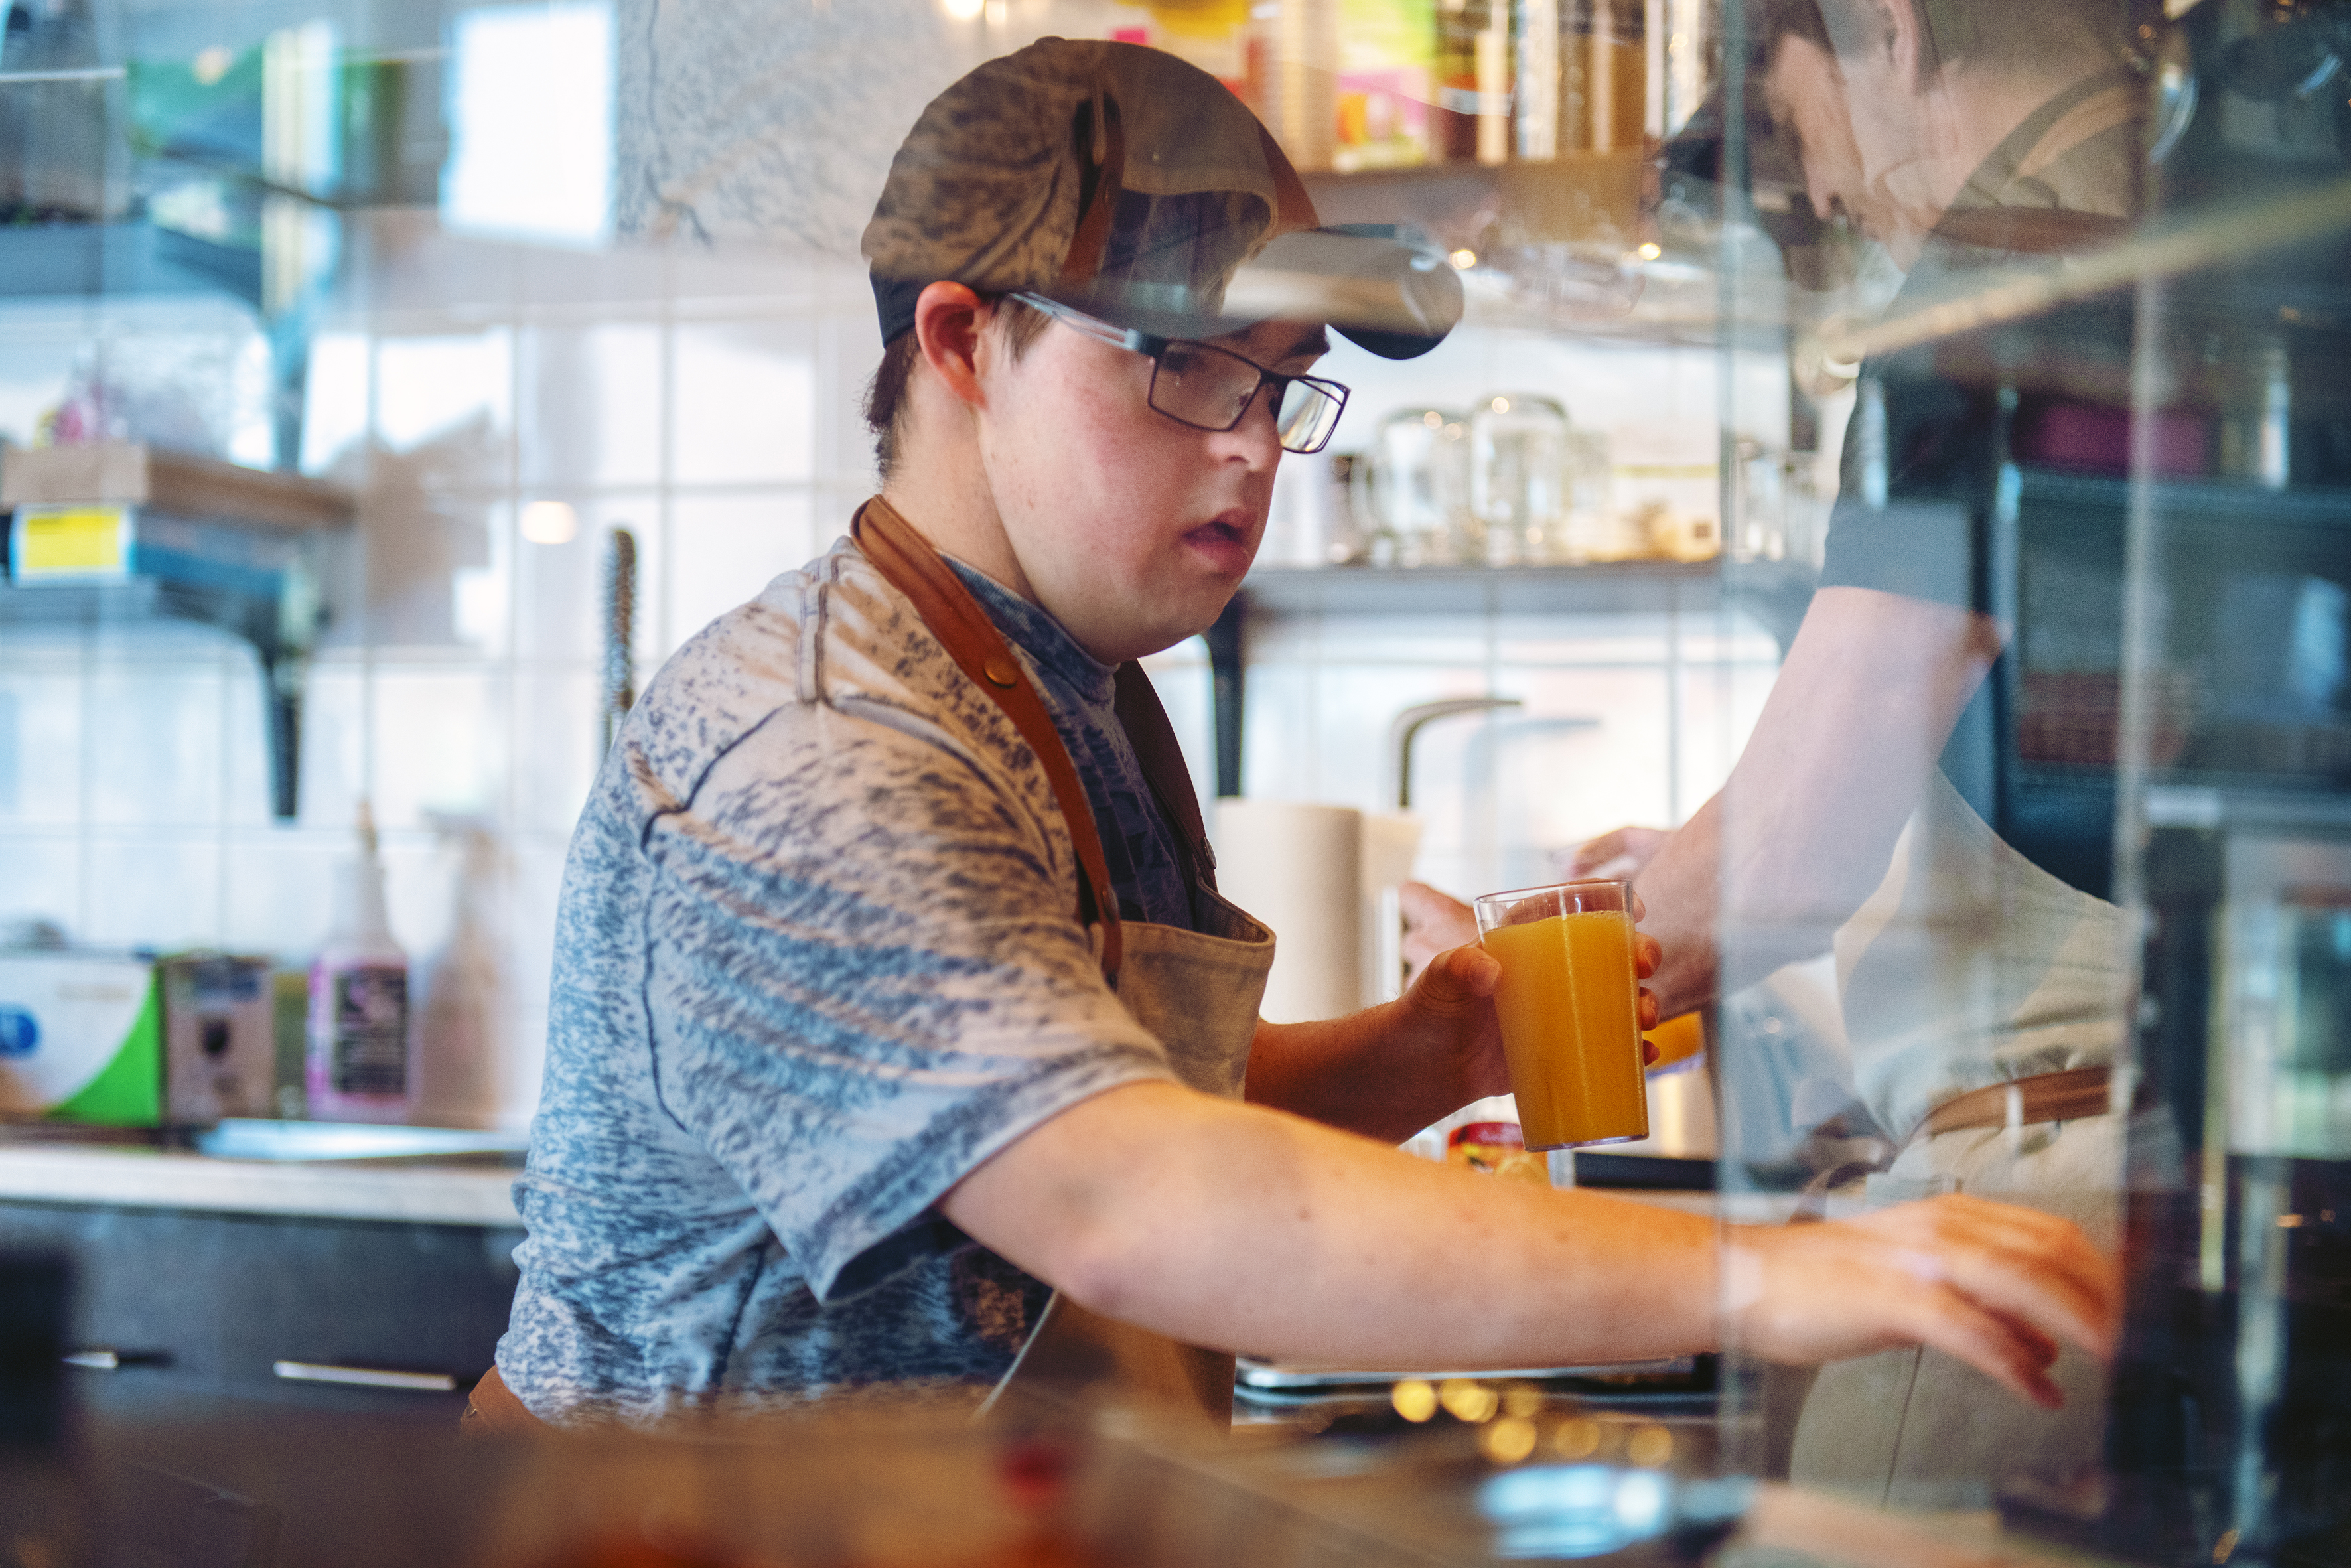 Young teenager working in a coffee shop serving juice